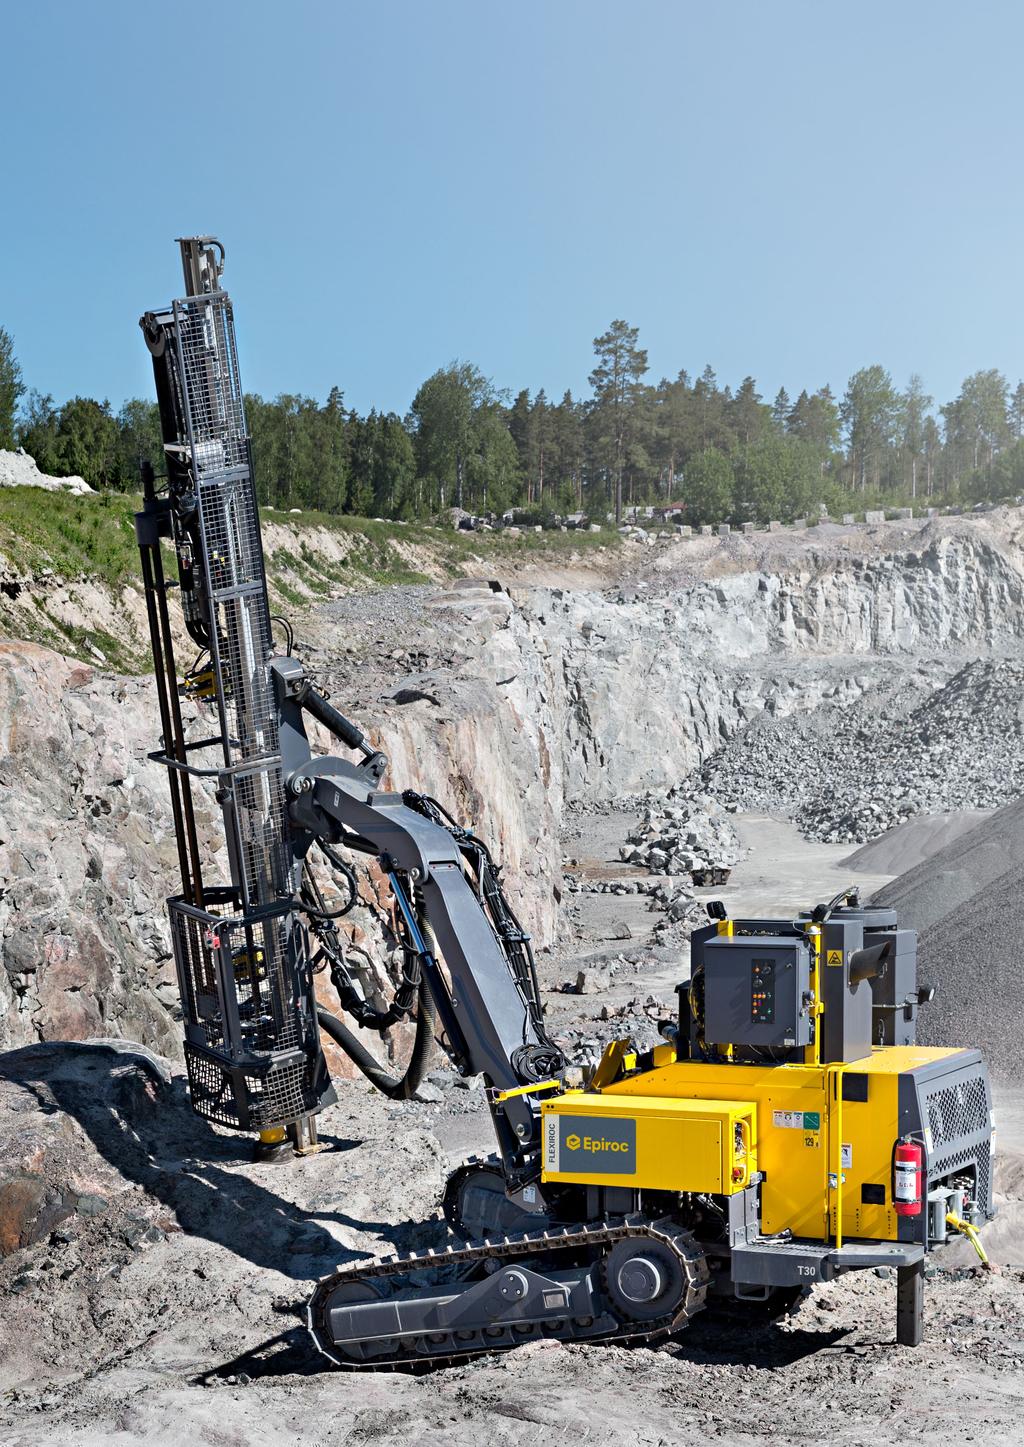 FlexiROC T30 R Quarry Edition Surface drill rig for